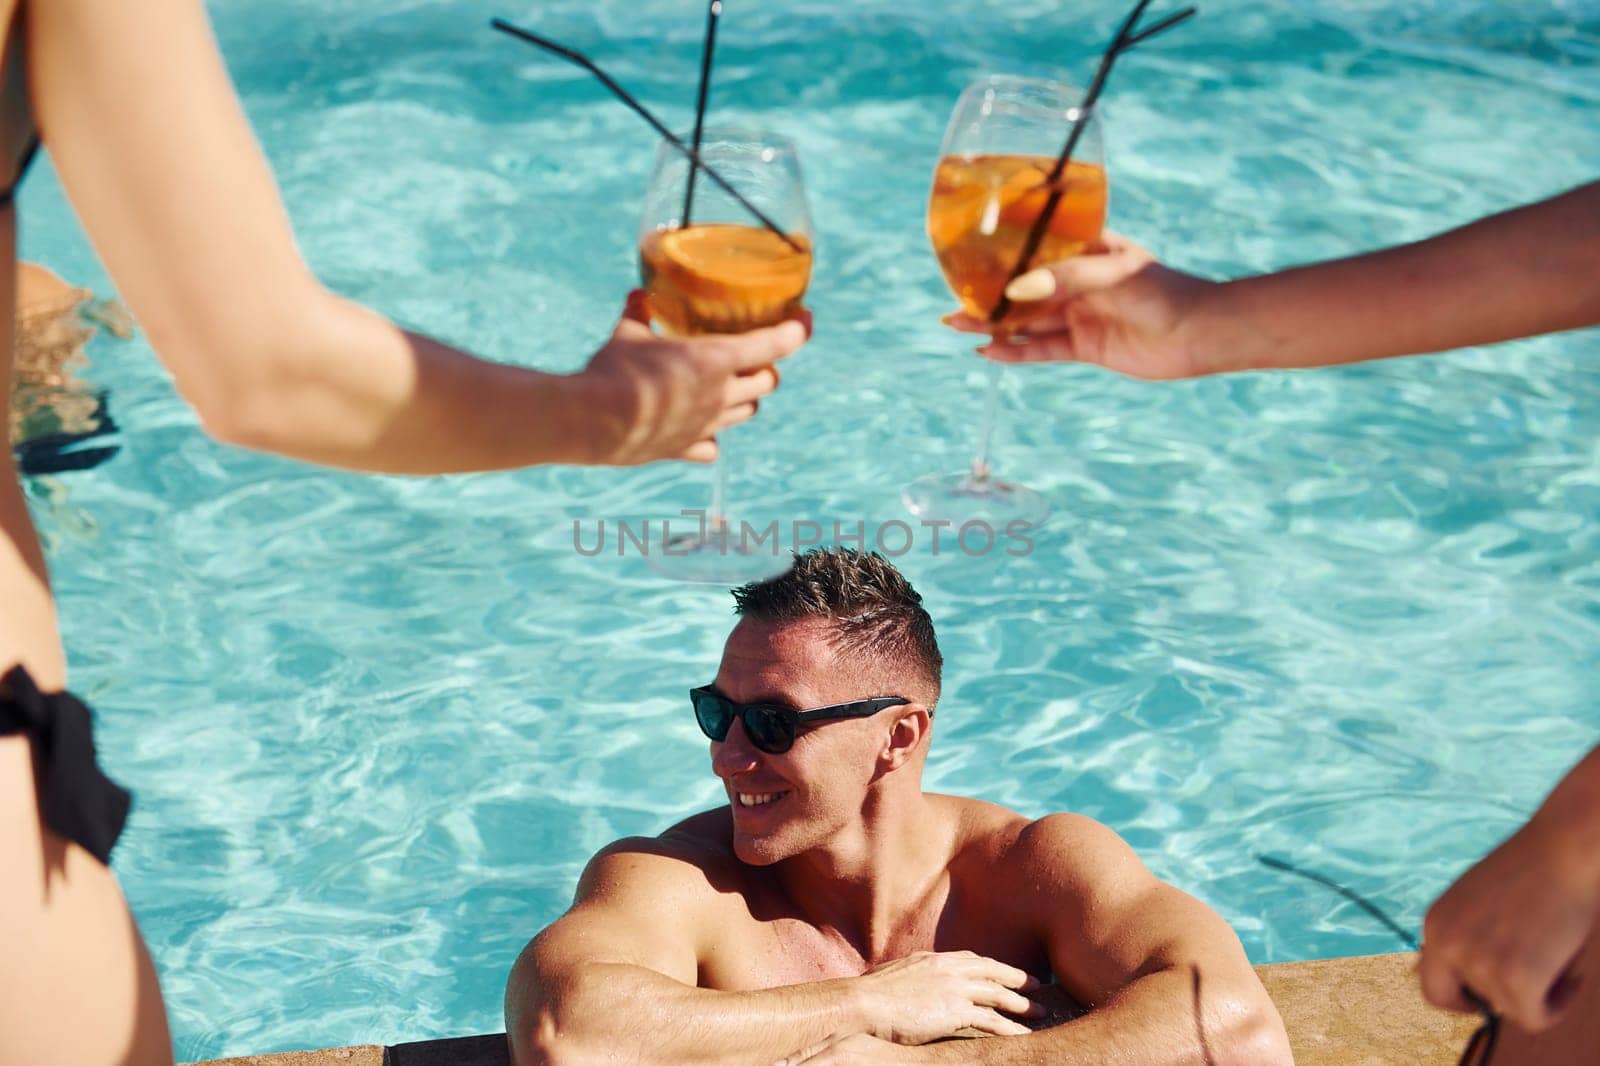 Fresh cocktails in hands. Group of young happy people have fun in swimming pool at daytime.